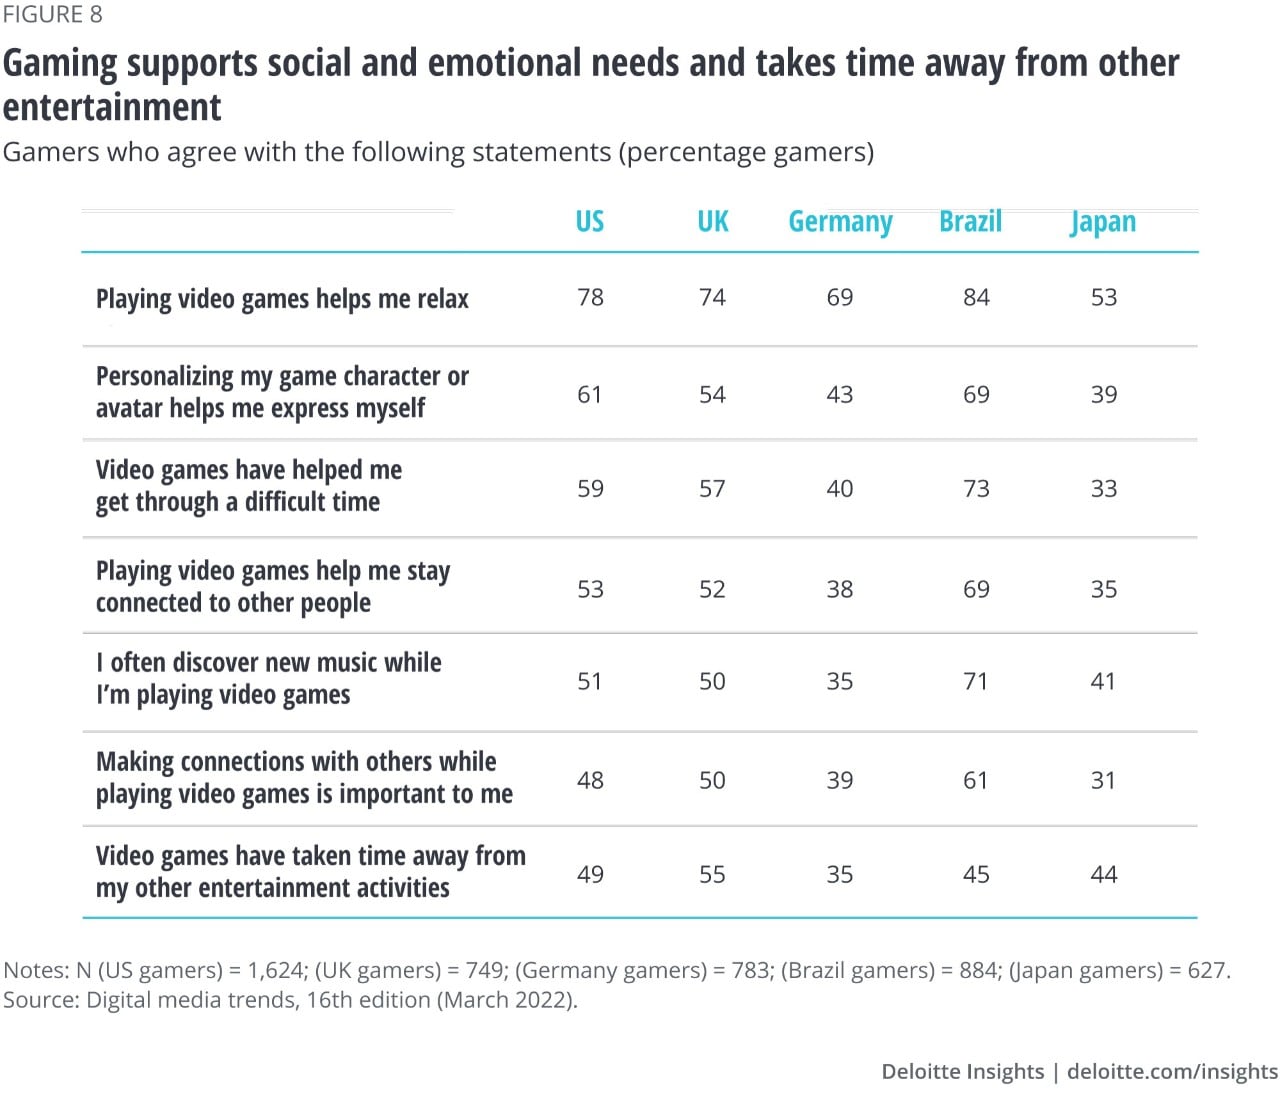 Figure 8. Gaming supports social and emotional needs, and takes time away from other entertainment